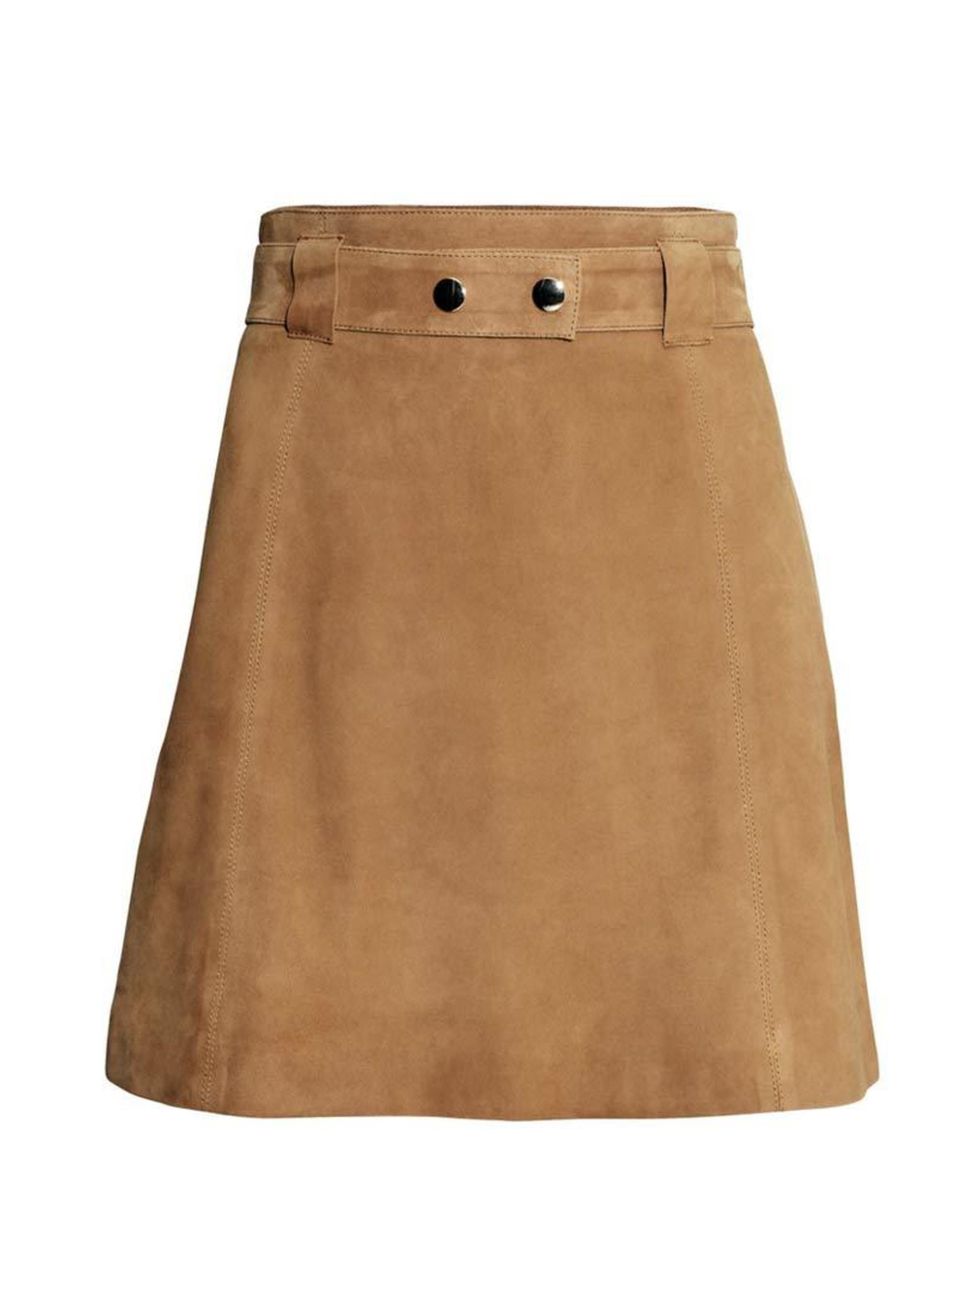 <p>The 70s trend is one that we can't wait to wear - starting with this suede skirt. </p>

<p><a href="http://www.hm.com/gb/product/89395?article=89395-B" target="_blank">H&M</a> skirt, £99.99</p>